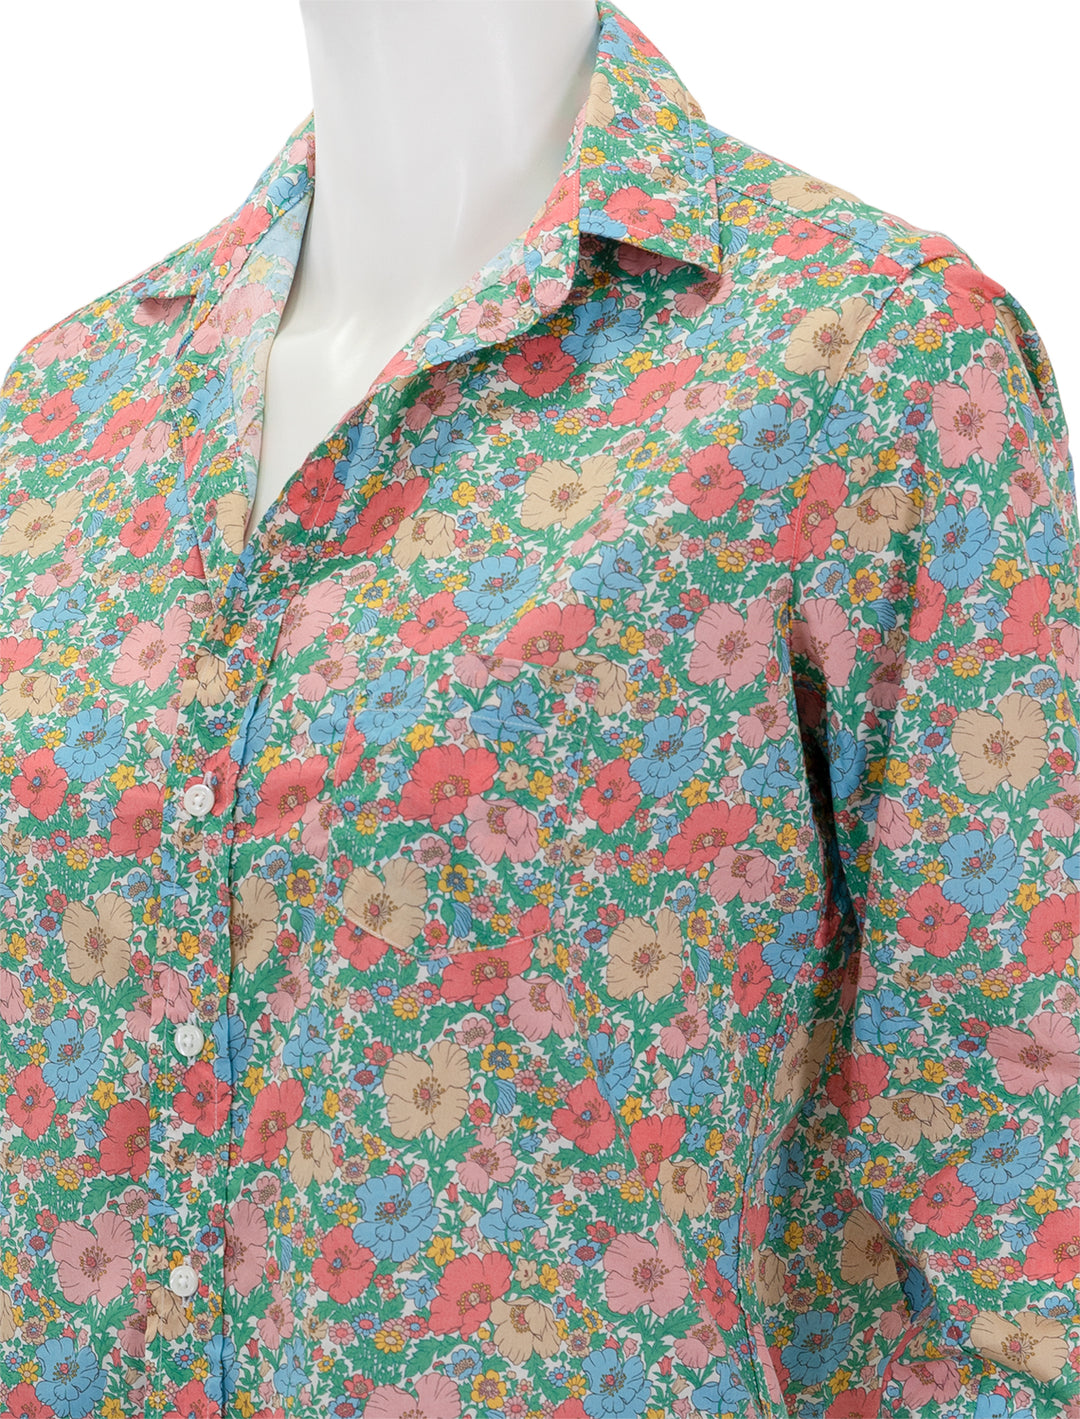 Close-up view of Frank & Eileen's eileen in pink, green and blue floral.